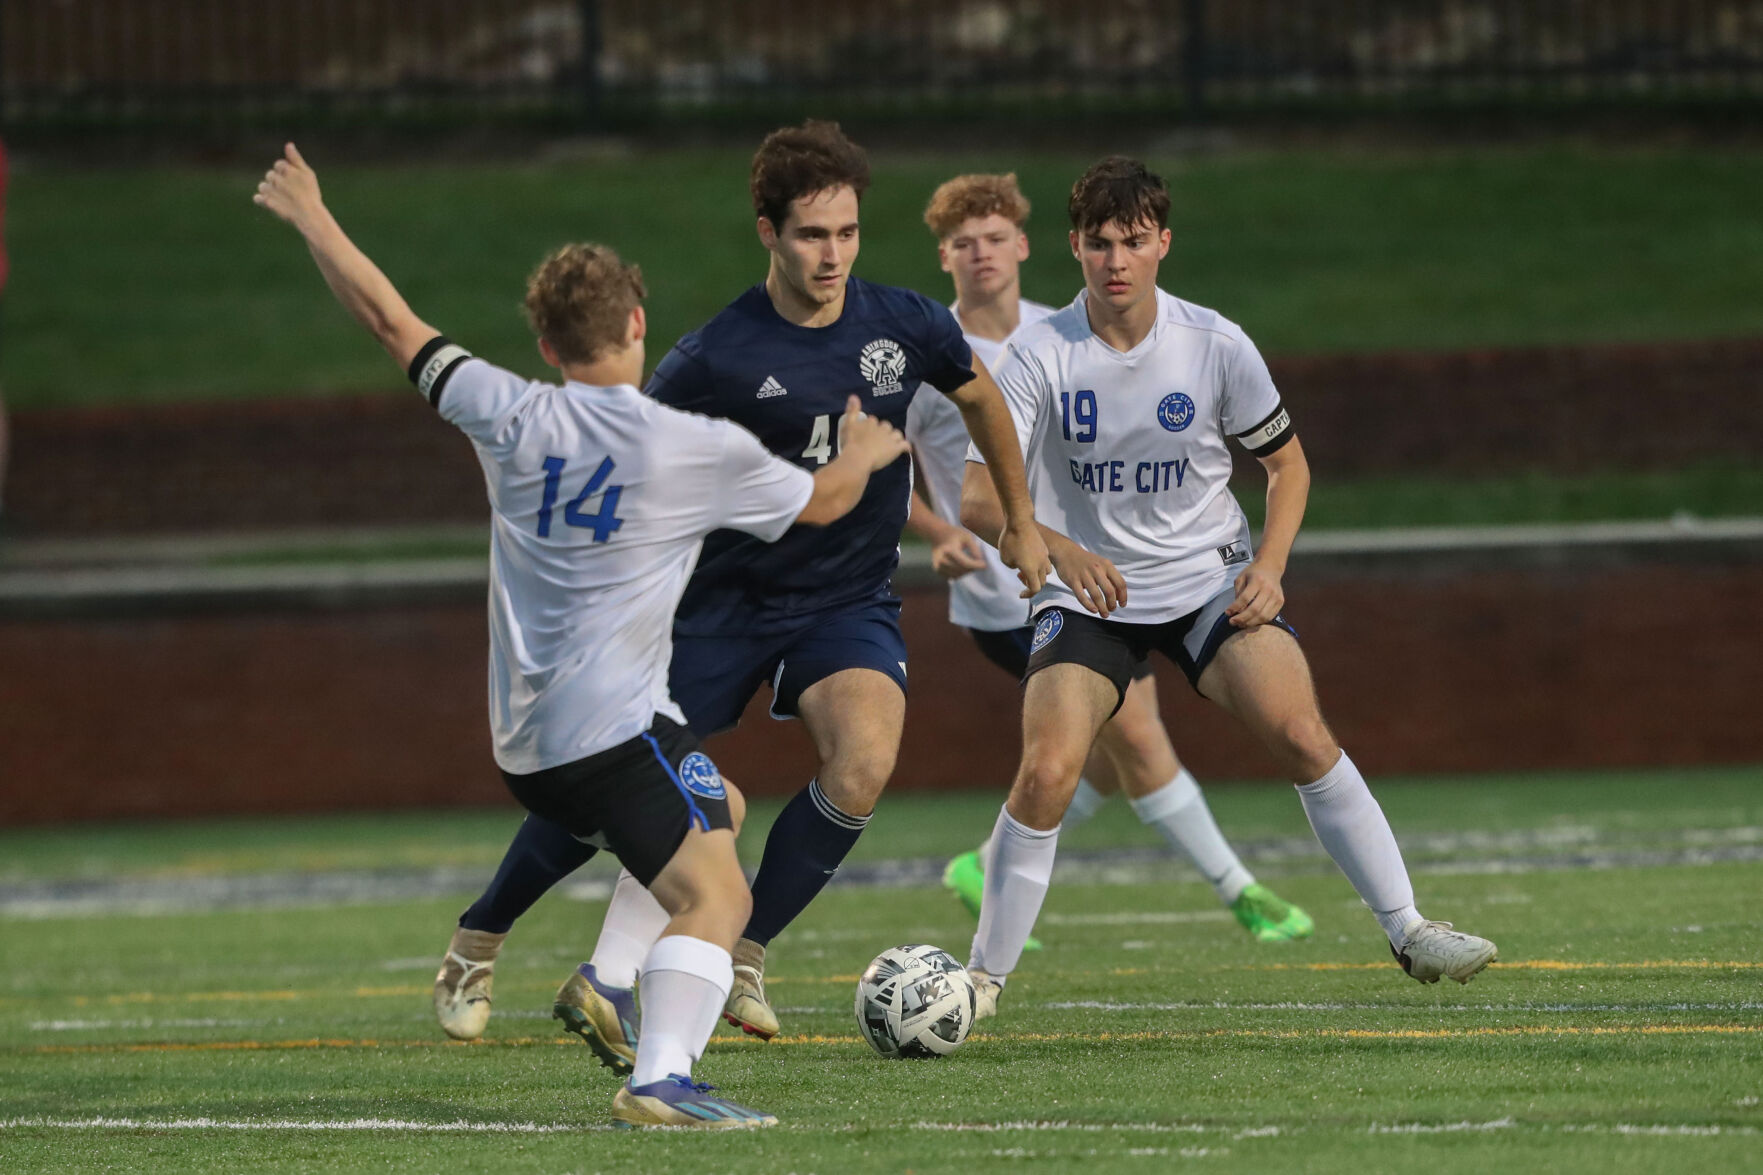 PREP BOYS SOCCER: Jenkins’ goal sets up probable playoff for Falcons, Blue Devils in Mountain 7 District